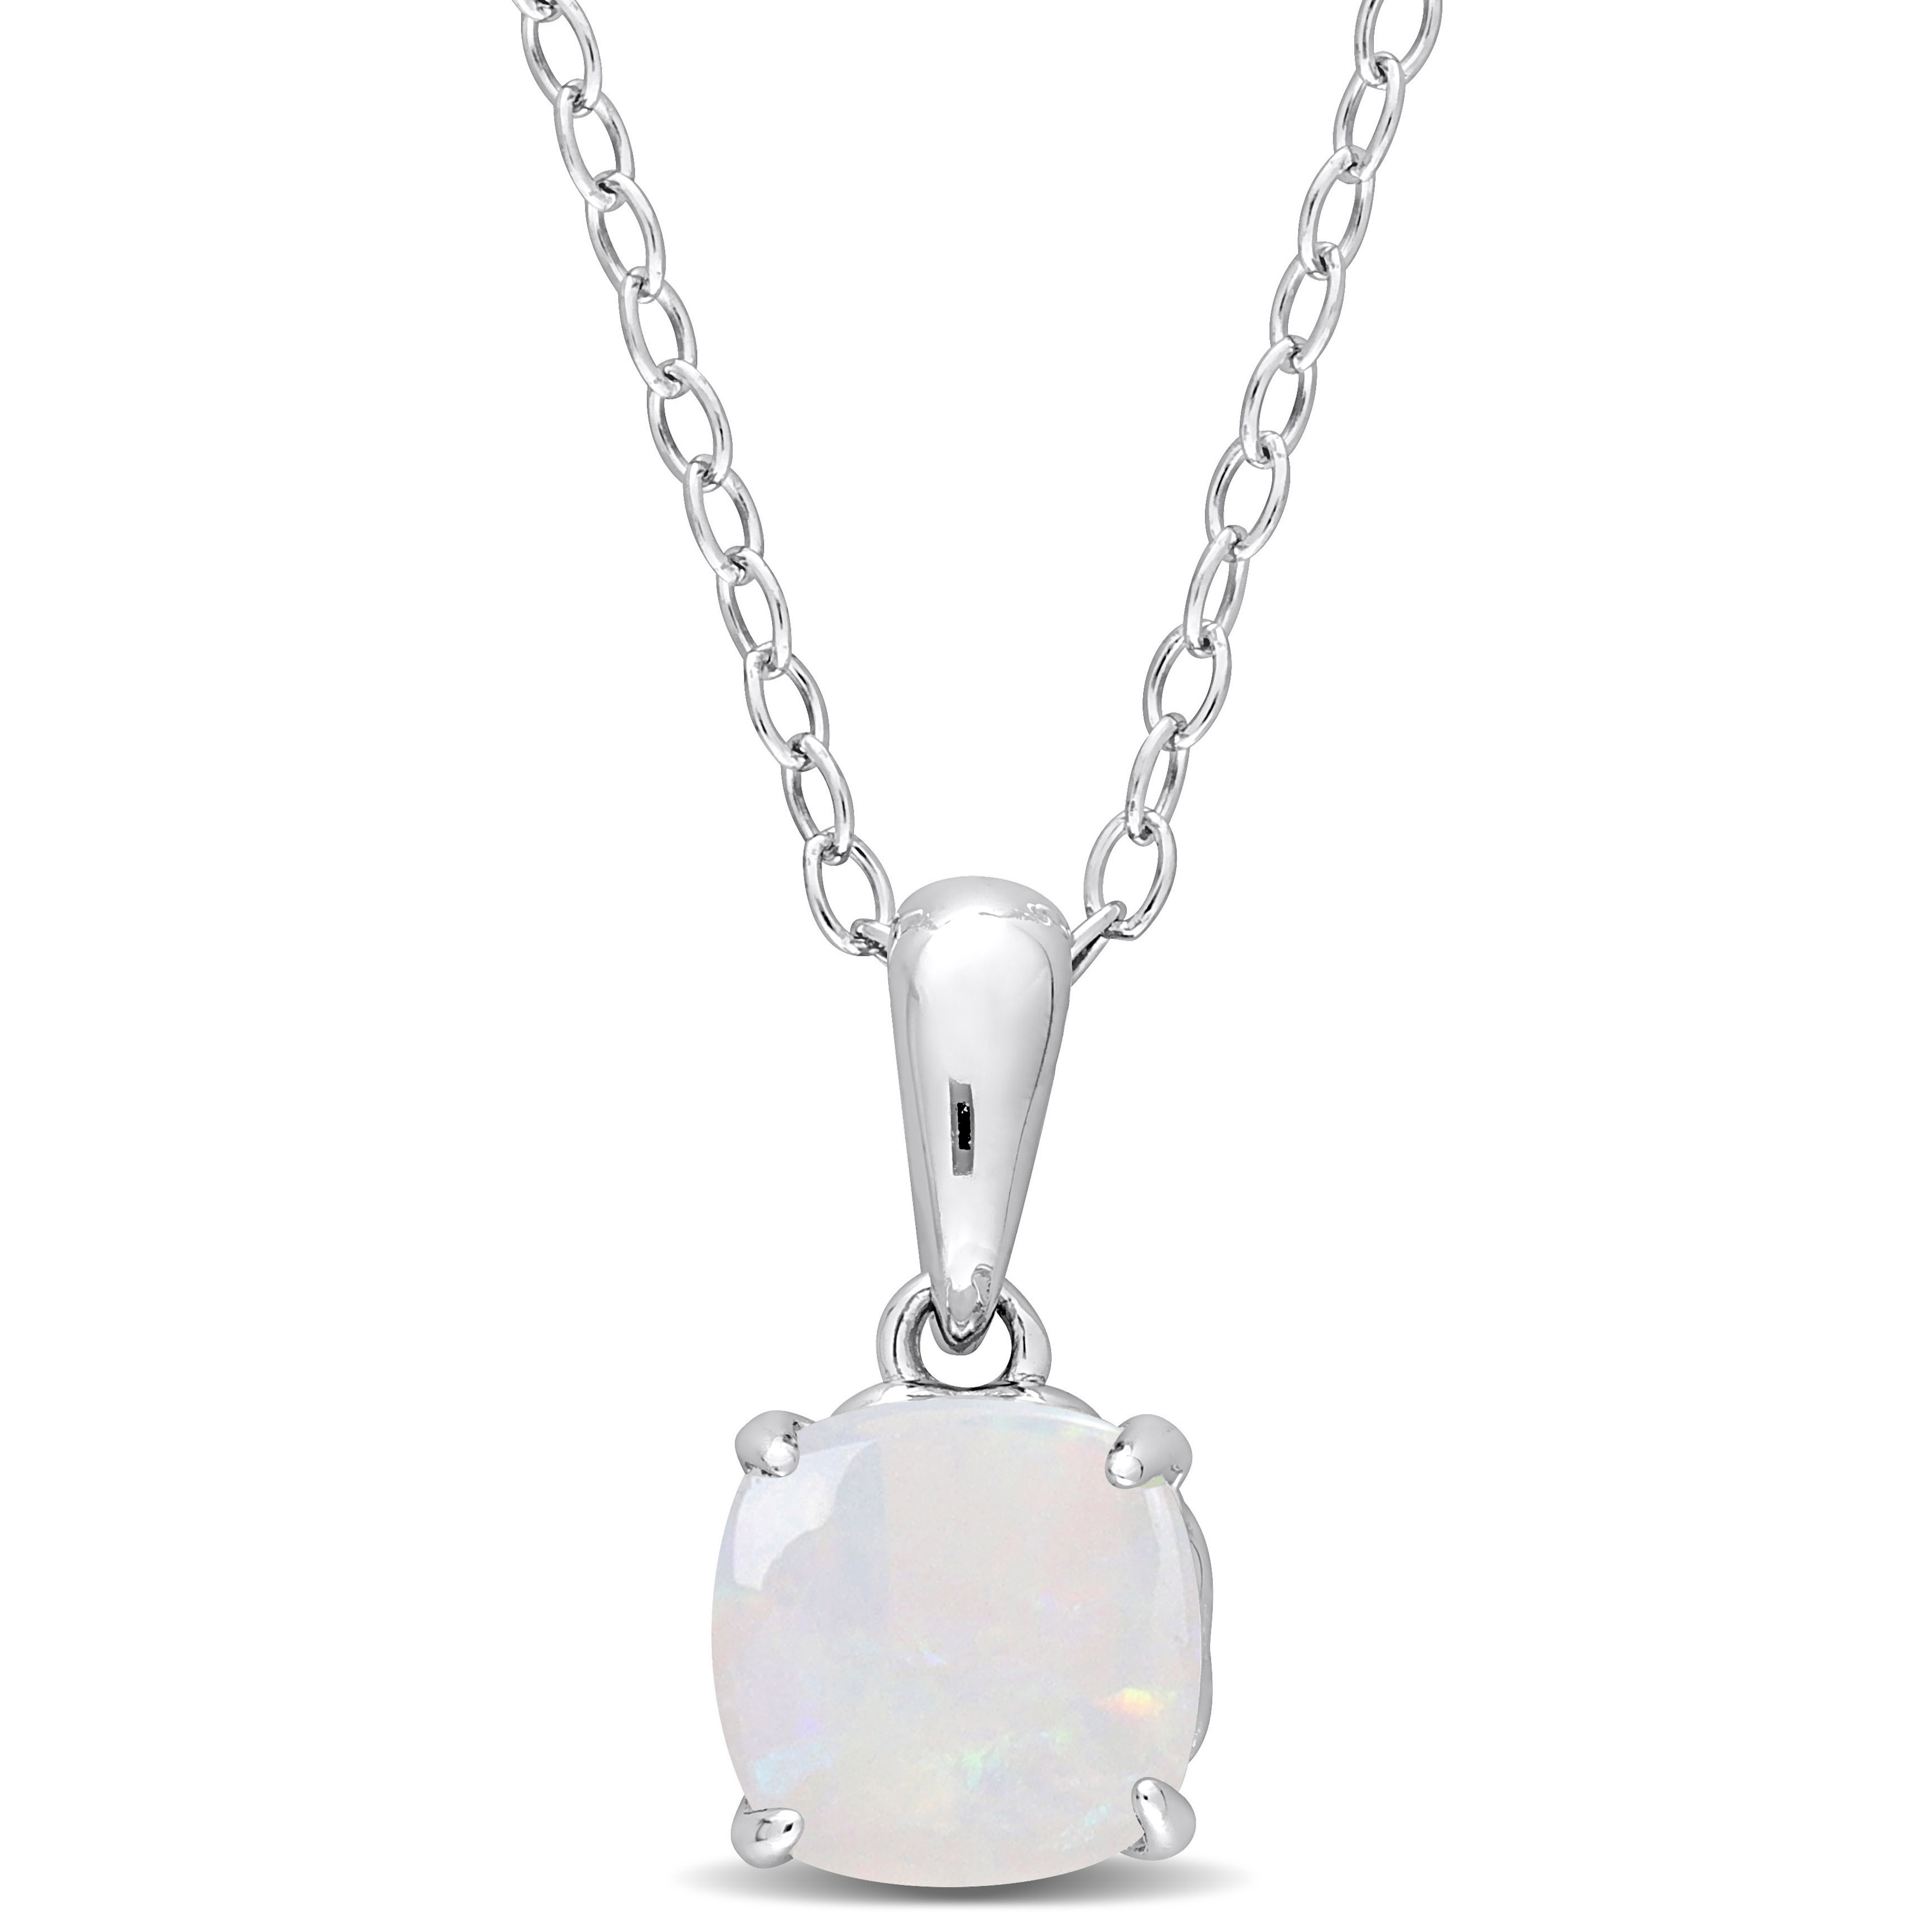 5/8 CT TGW Cushion Cut Opal Solitaire Heart Design Pendant with Chain in Sterling Silver - 18 in.